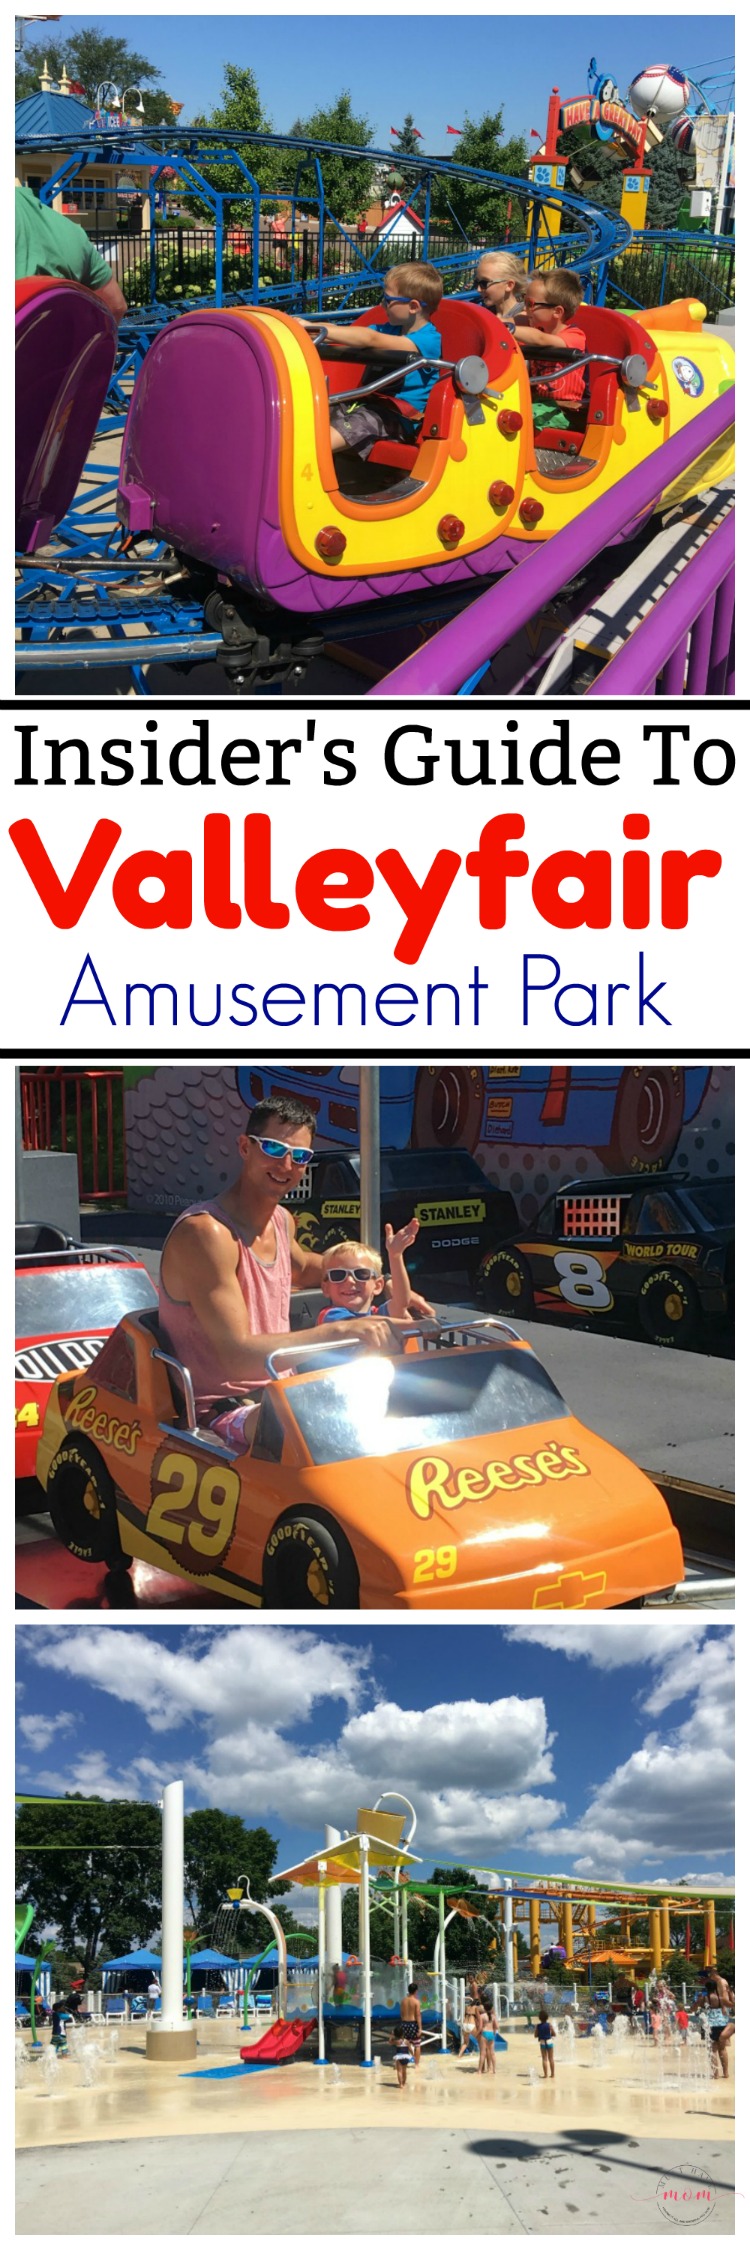 What to pack for a trip to Valleyfair amusement park with your family + tips to save money and have the most fun possible!